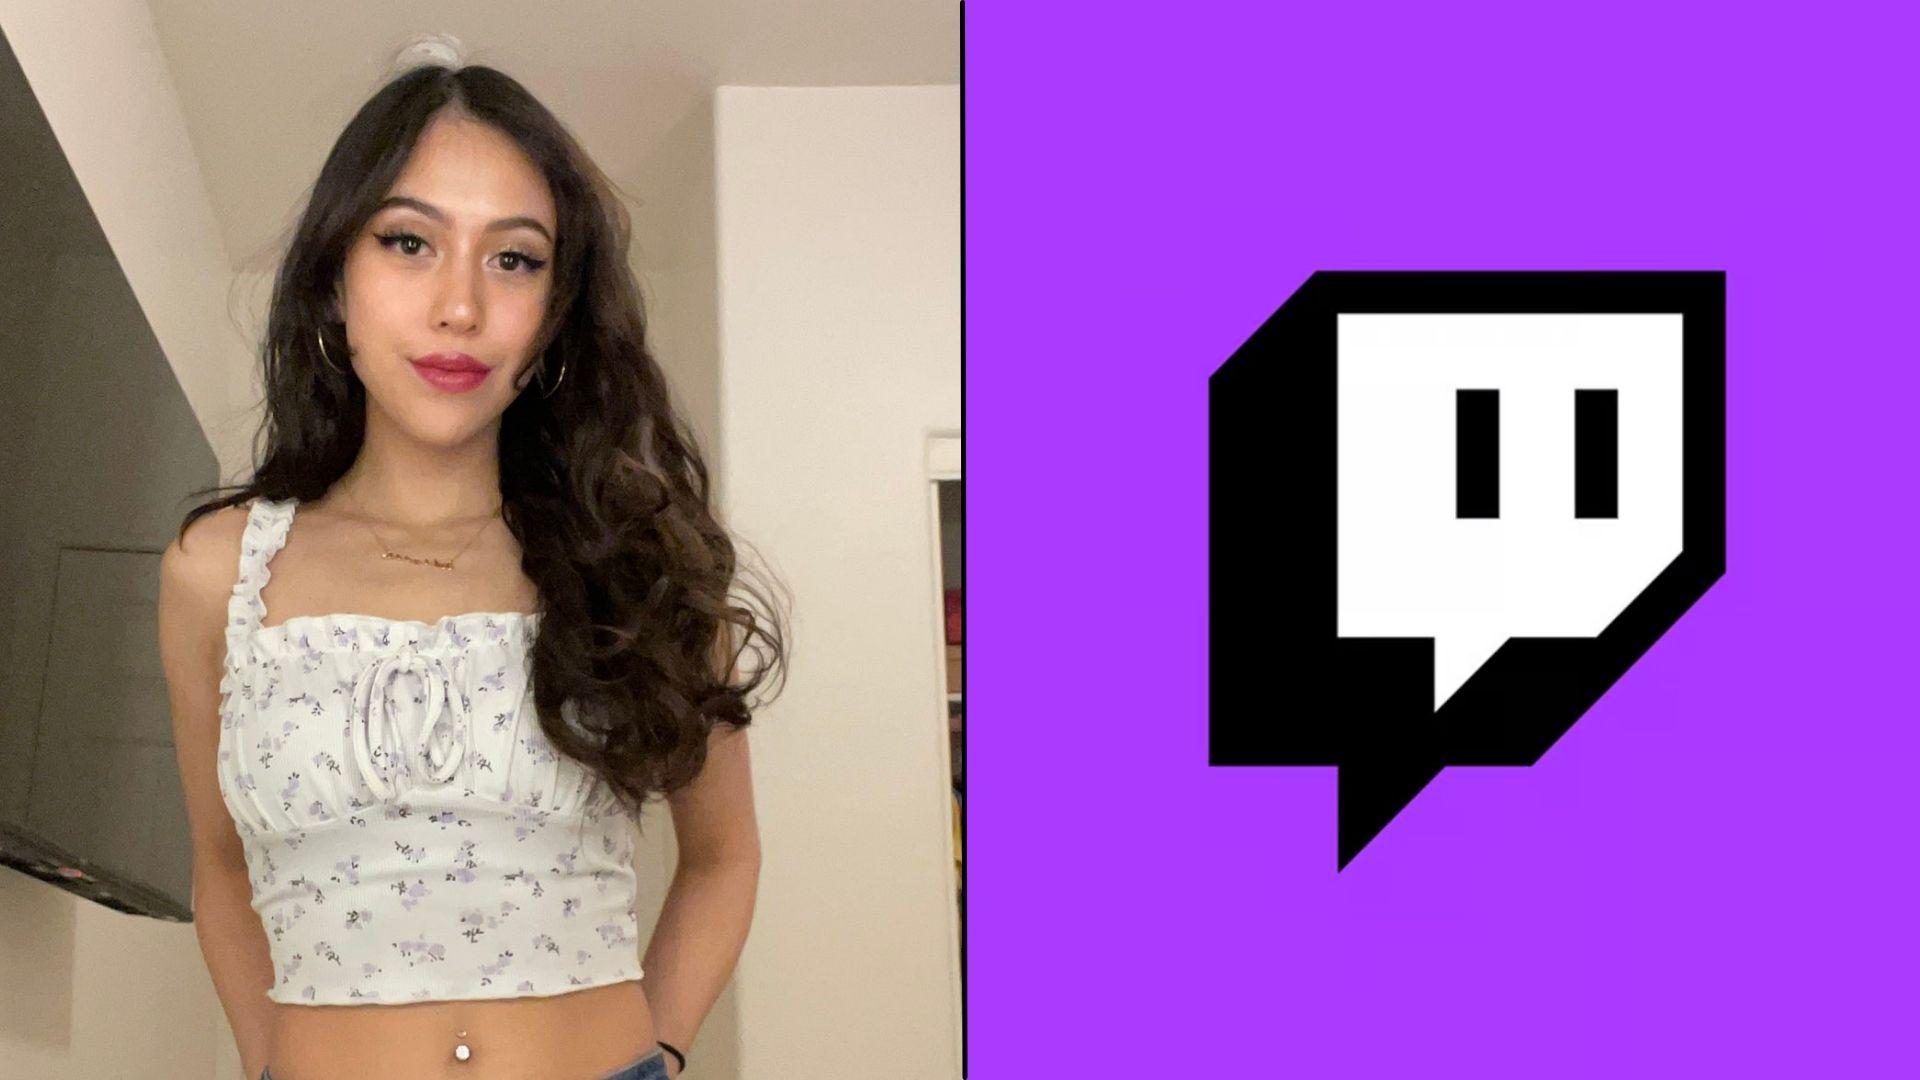 Female streamer posing at camera side-by-side with Twitch logo